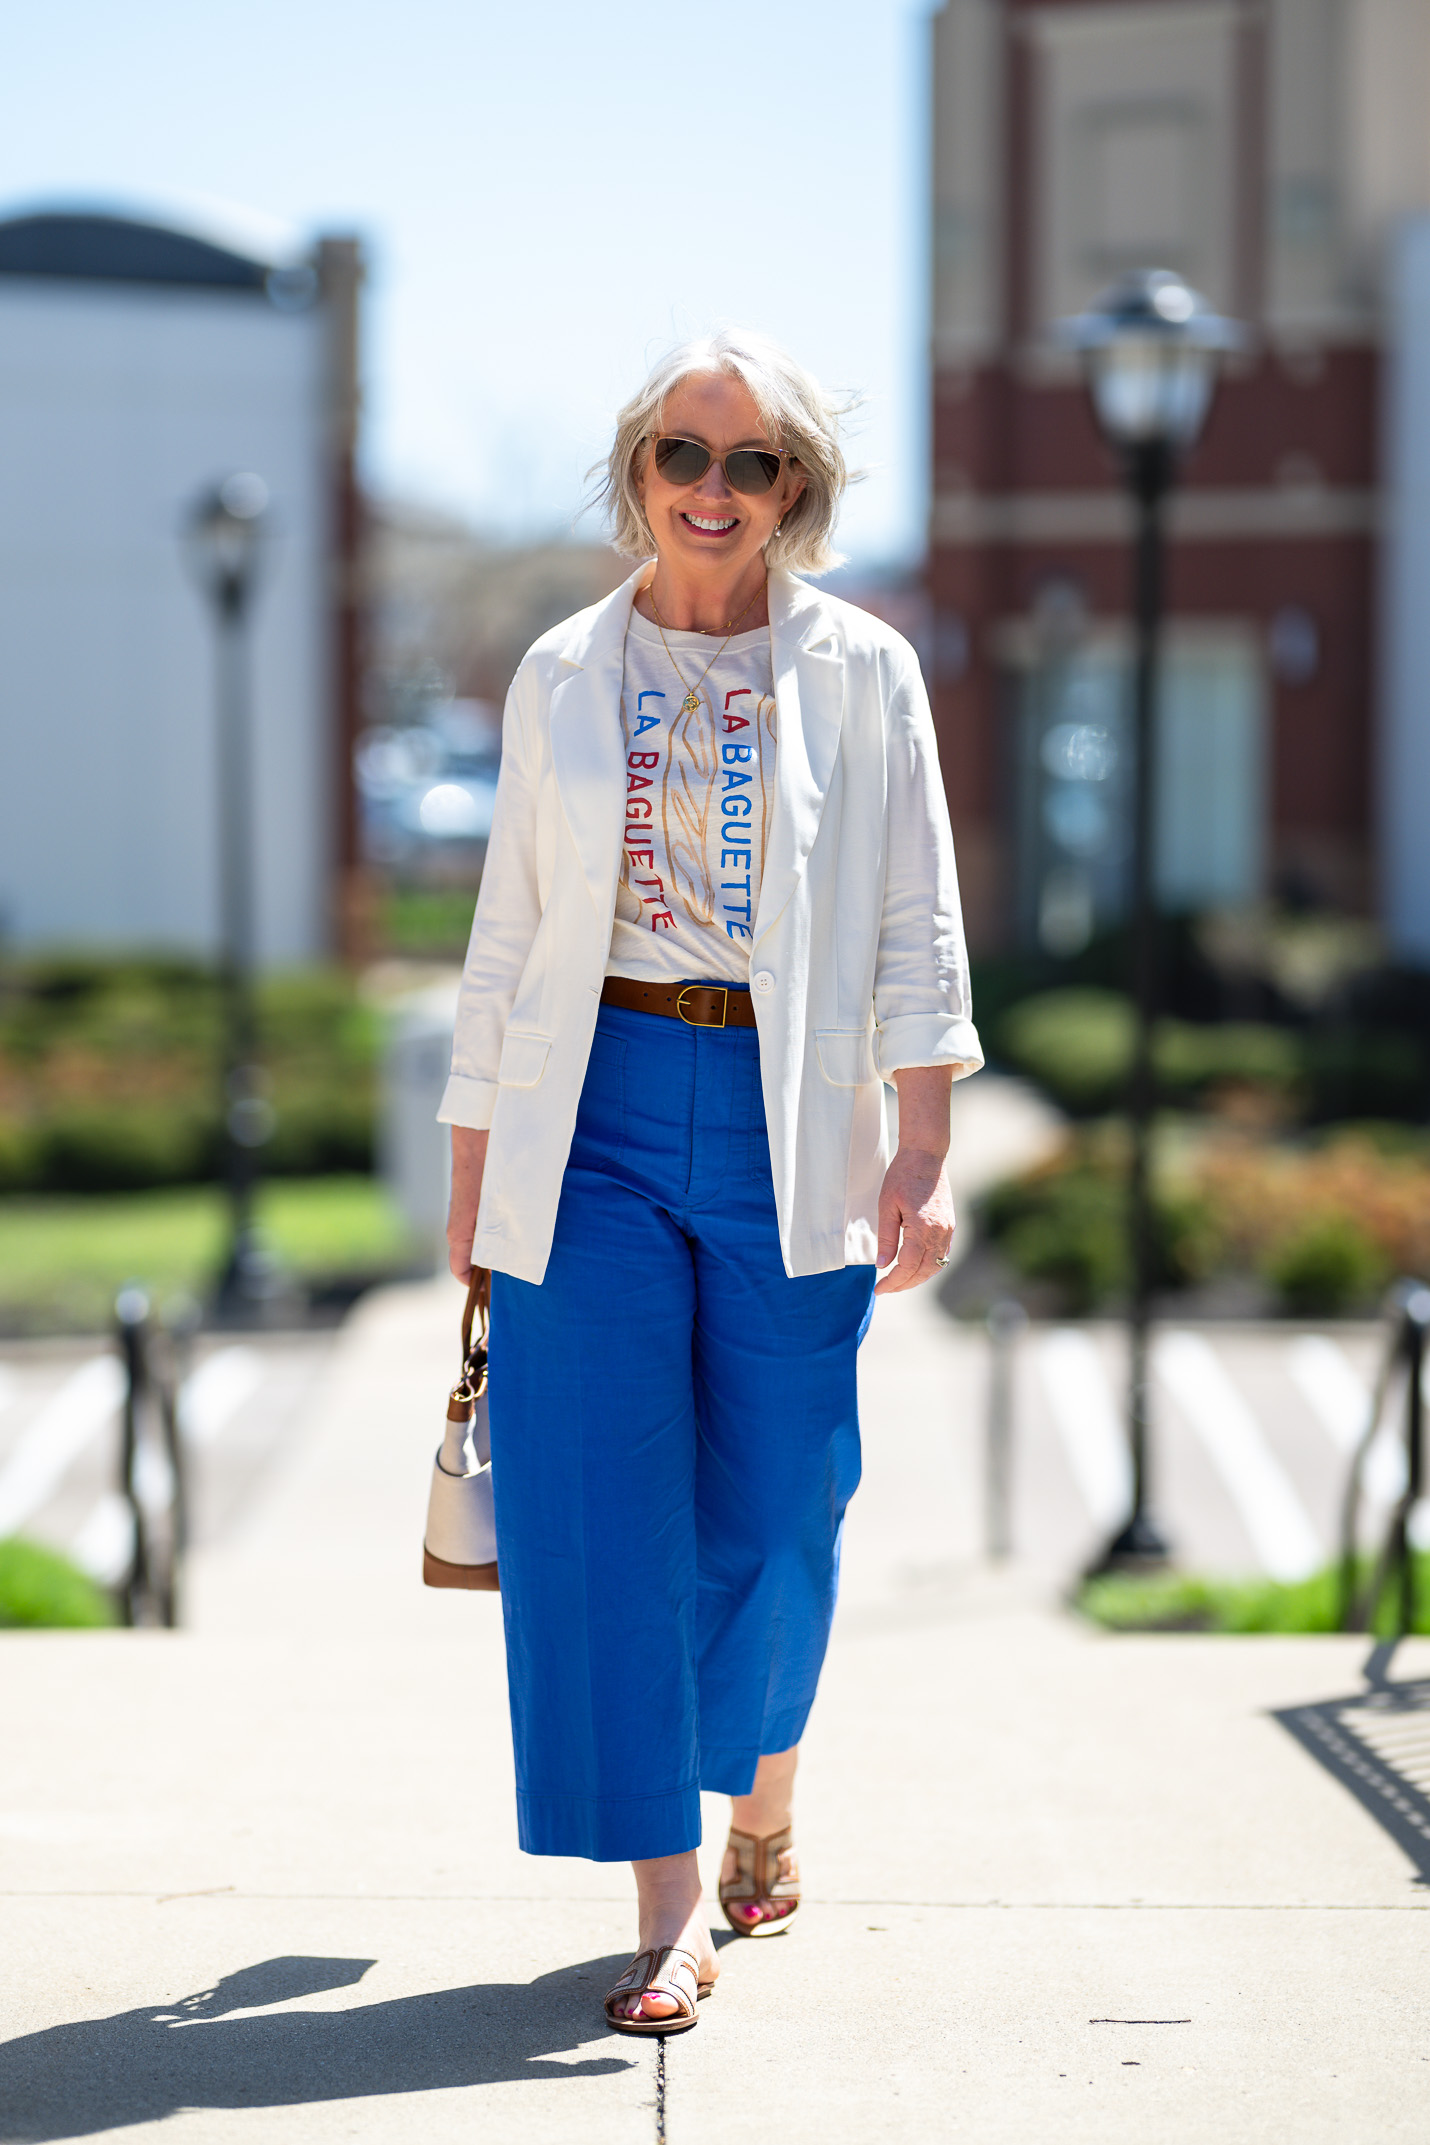 Wearing color Over 50